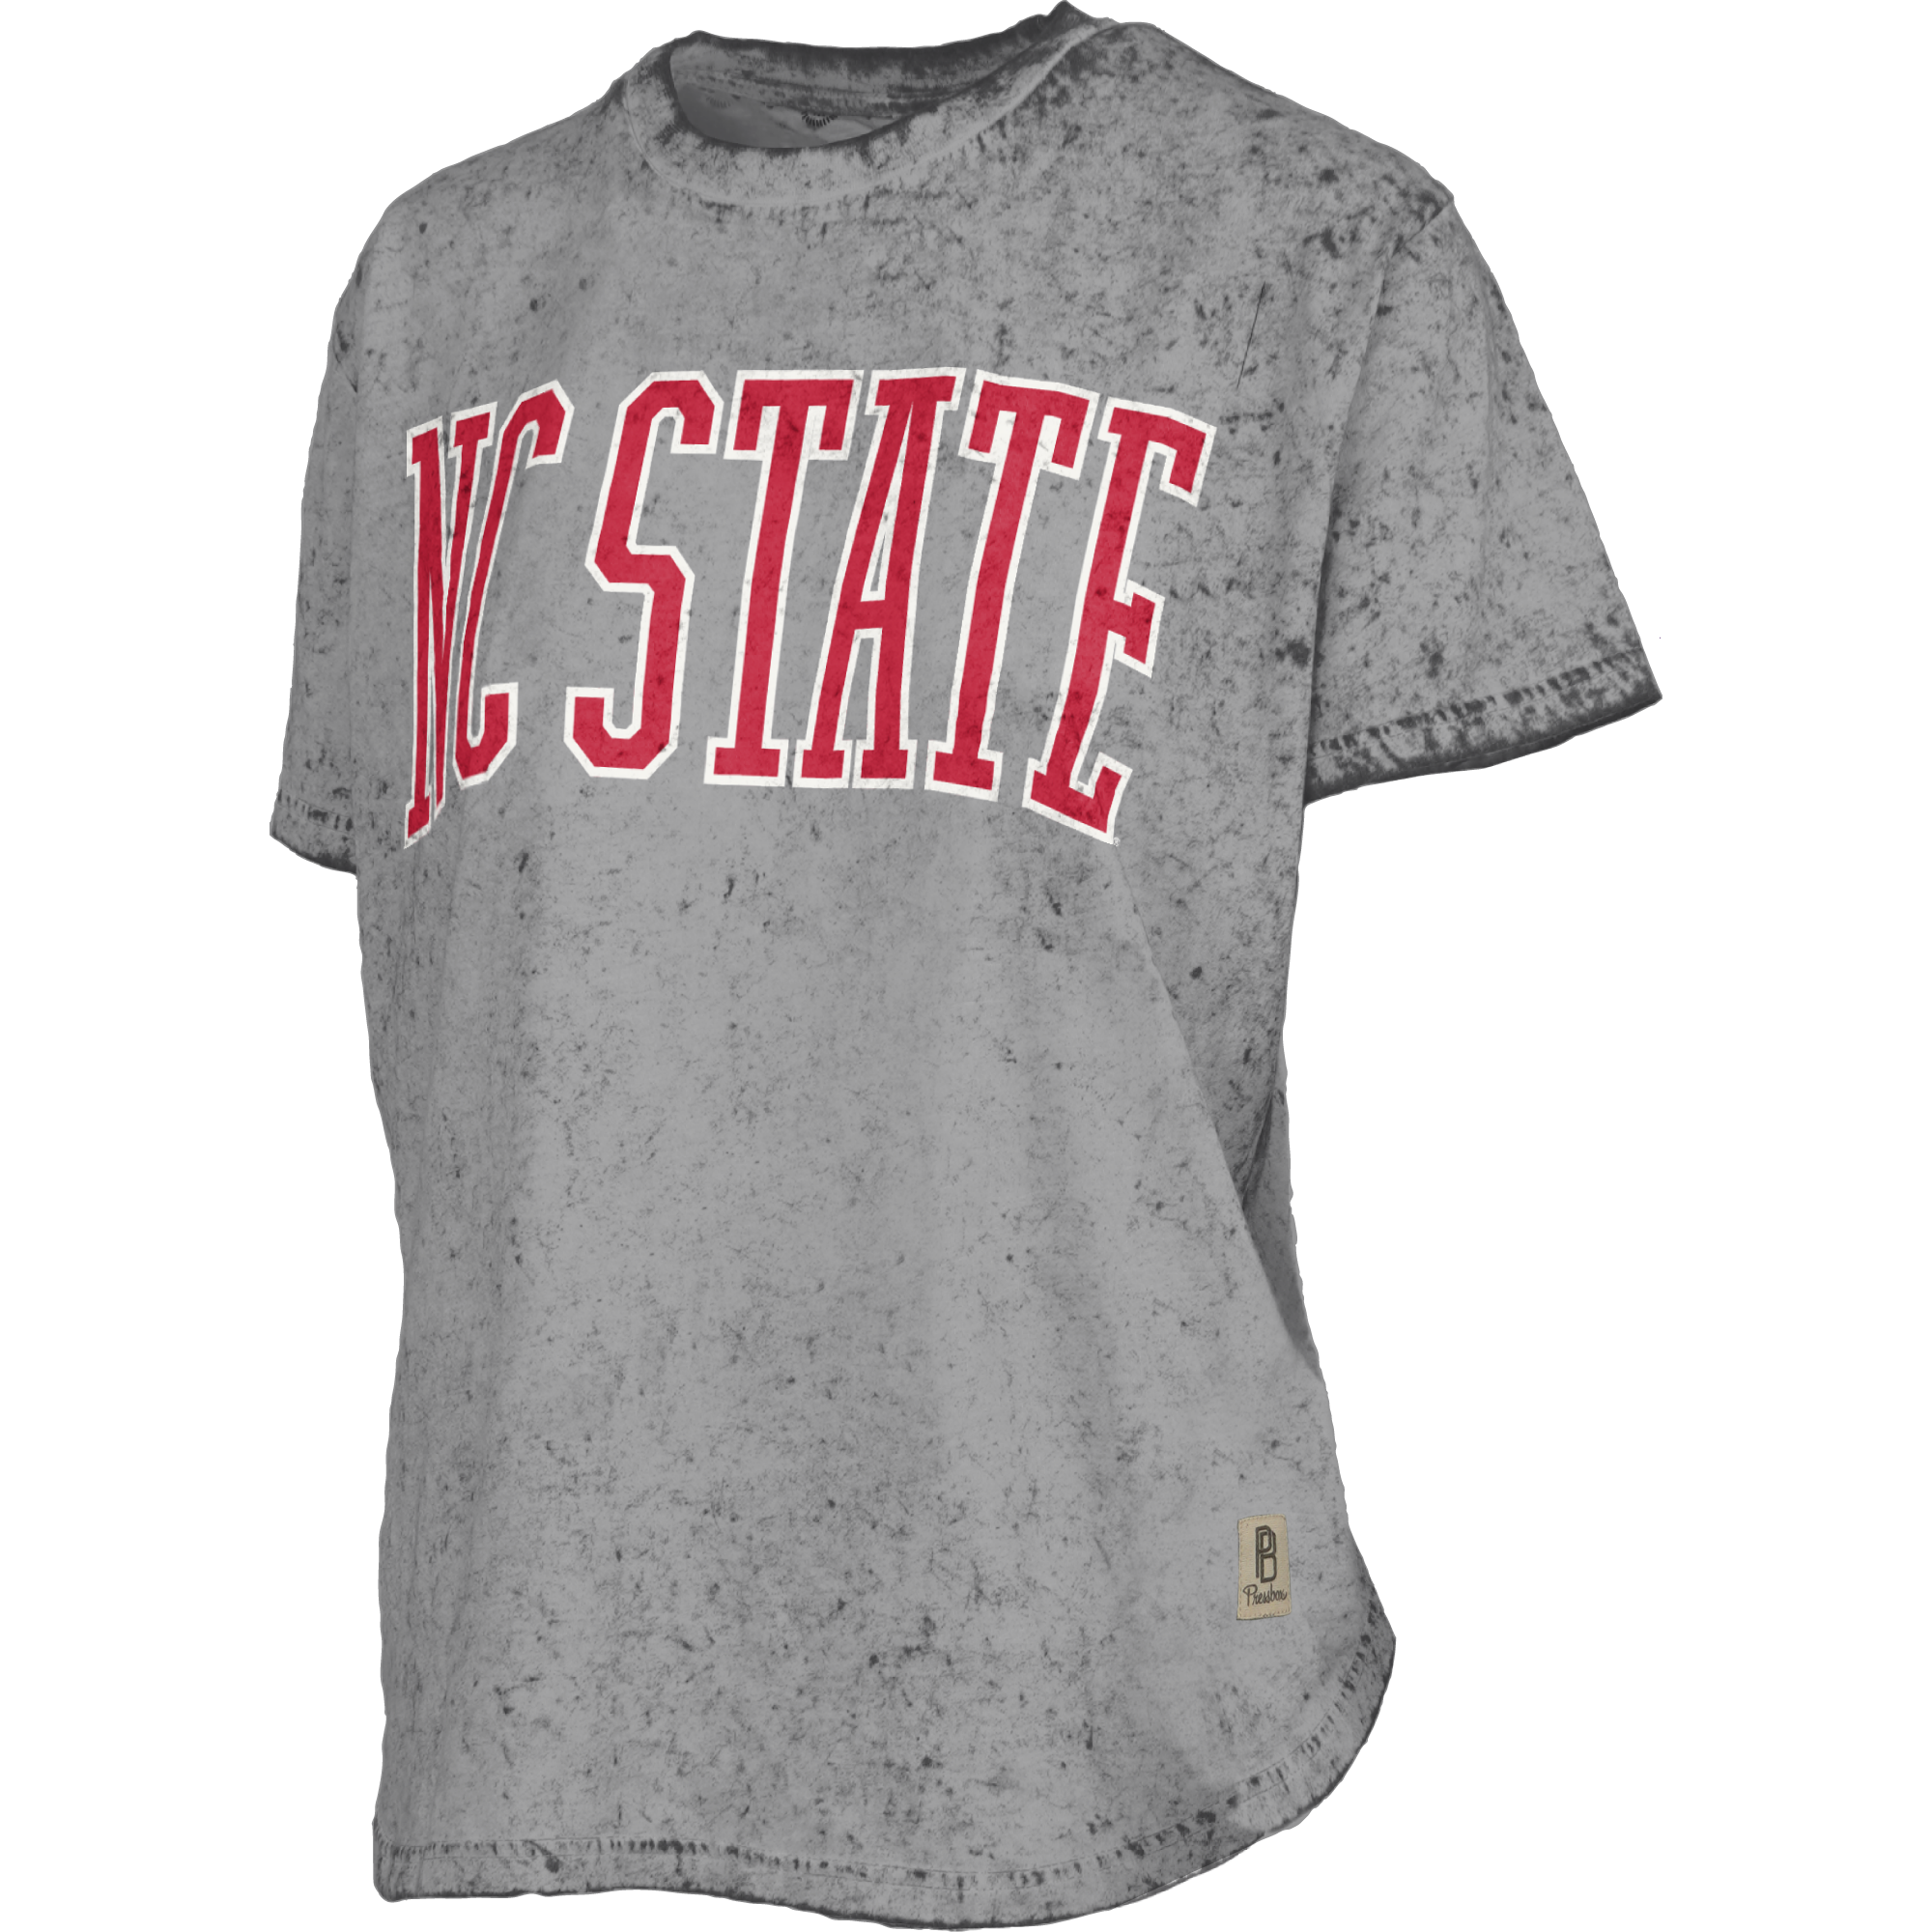 NC State Wolfpack Women's Grey "Southlawn" Oversized Sun Washed Rounded-Bottom T-Shirt